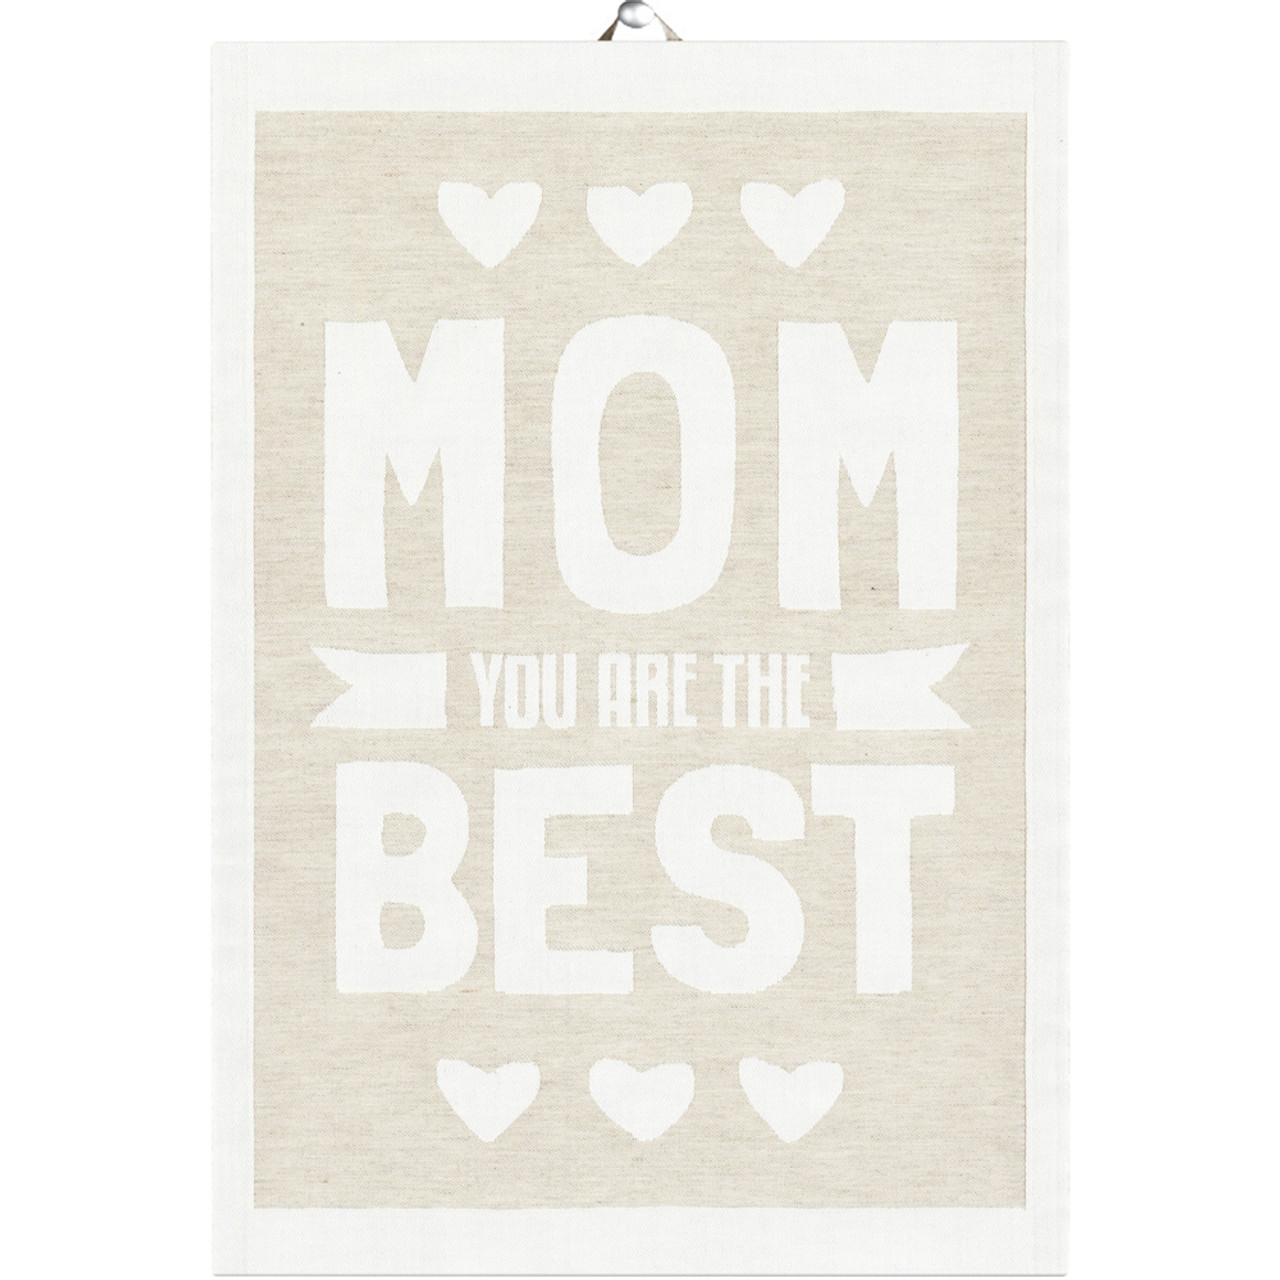 https://cdn11.bigcommerce.com/s-gblv2ntx1h/images/stencil/1280x1280/products/4476/13852/ekelund-tea-kitchen-towel-MOM__28121.1556647062.jpg?c=2